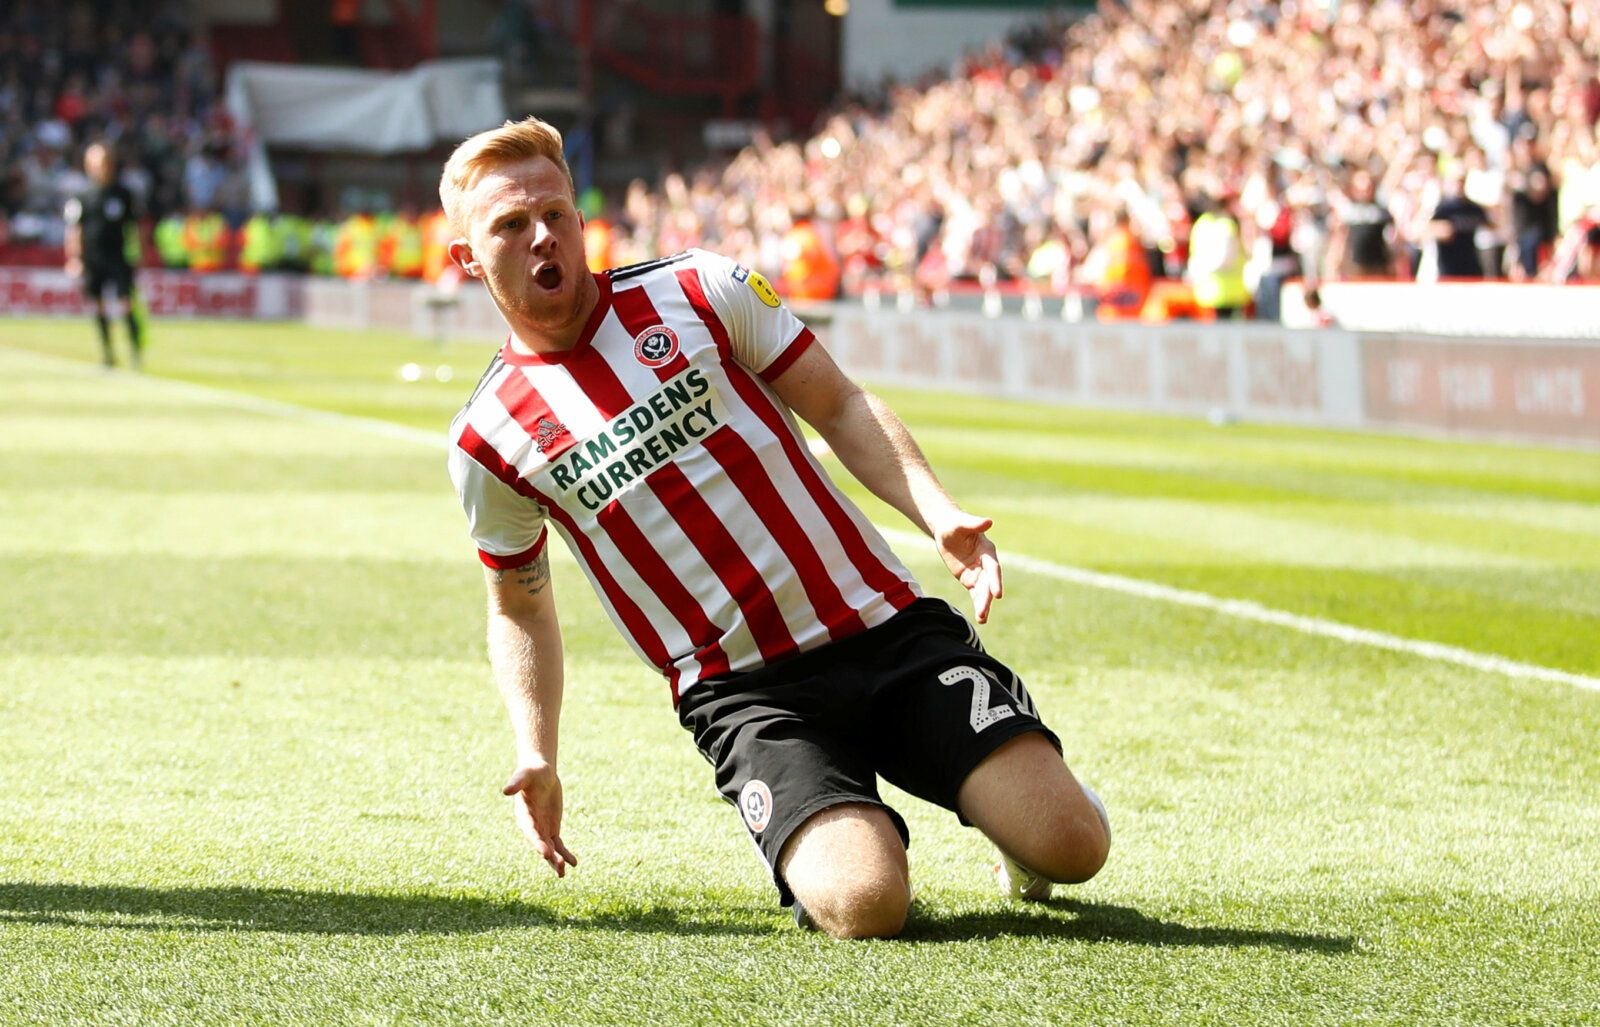 Soccer Football - Championship - Sheffield United v Nottingham Forest - Bramall Lane, Sheffield, Britain - April 19, 2019   Sheffield United's Mark Duffy celebrates scoring their first goal    Action Images/Carl Recine    EDITORIAL USE ONLY. No use with unauthorized audio, video, data, fixture lists, club/league logos or 